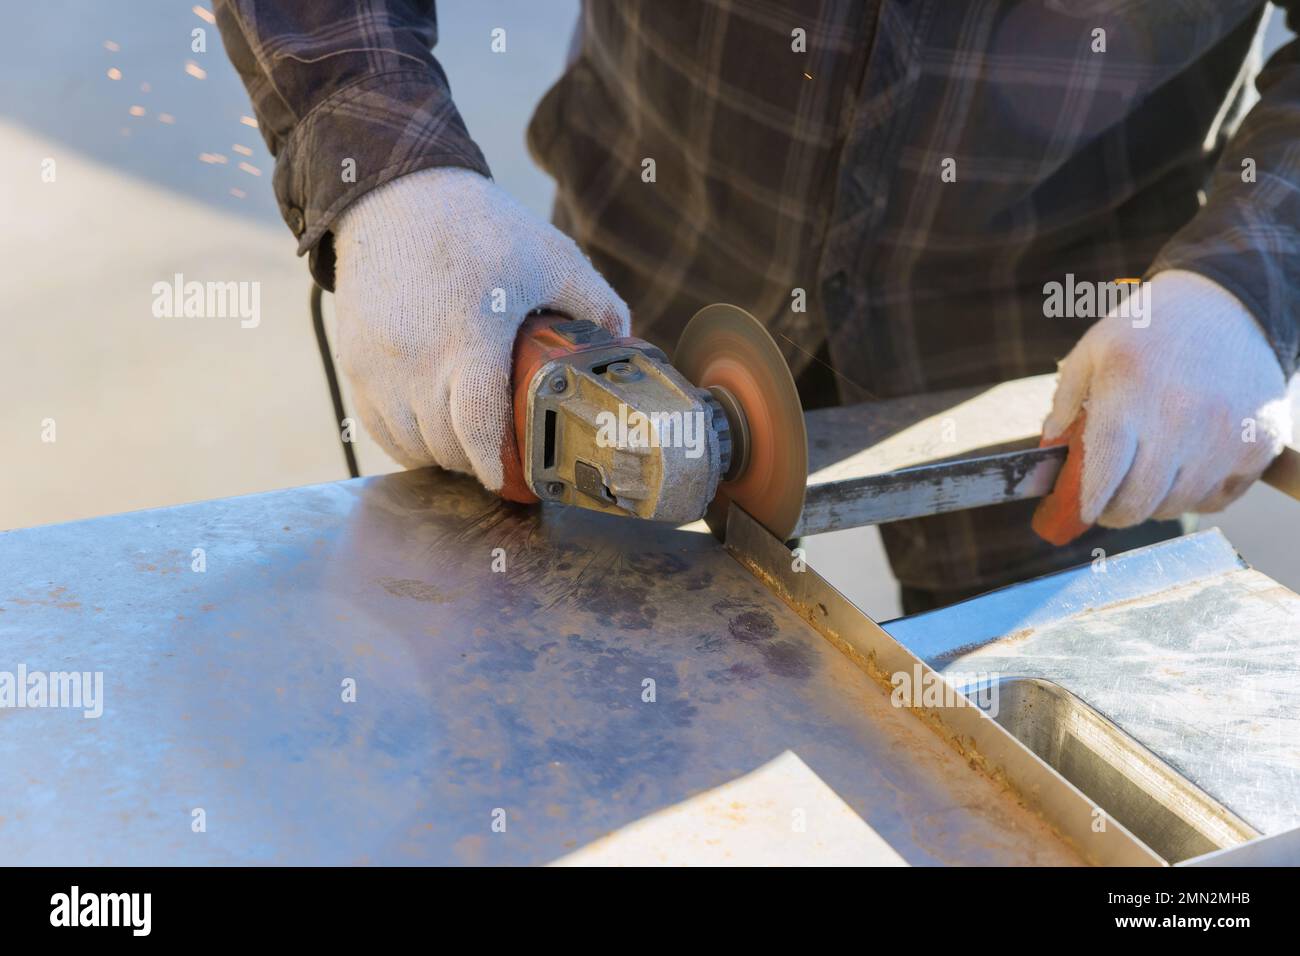 Worker using grinder, for cuts metal with grinder Stock Photo